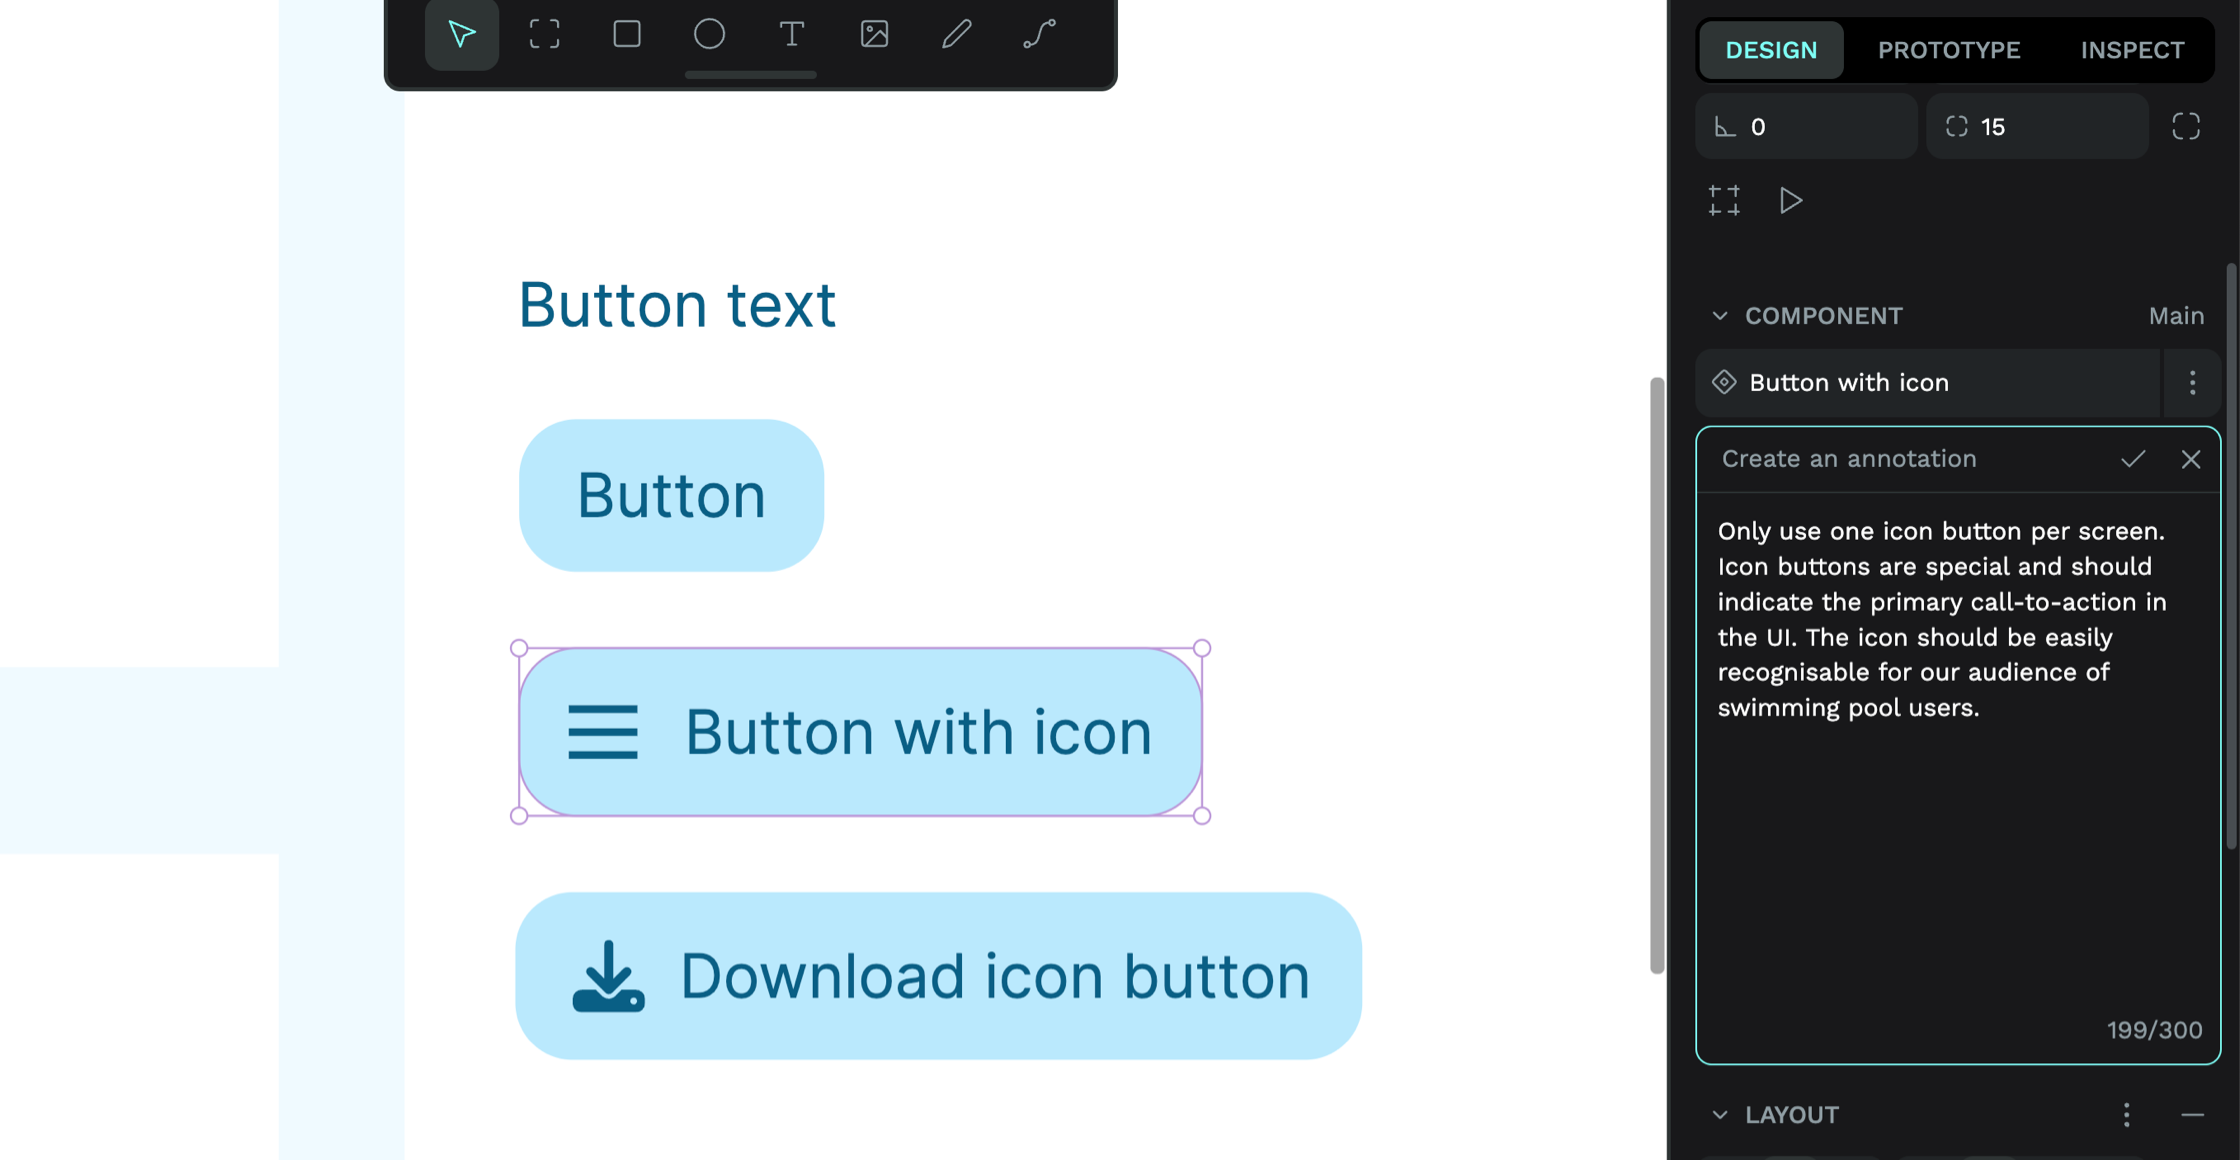 A selected button with icon component with an annotation detailing how only one of these components should be used per screen.